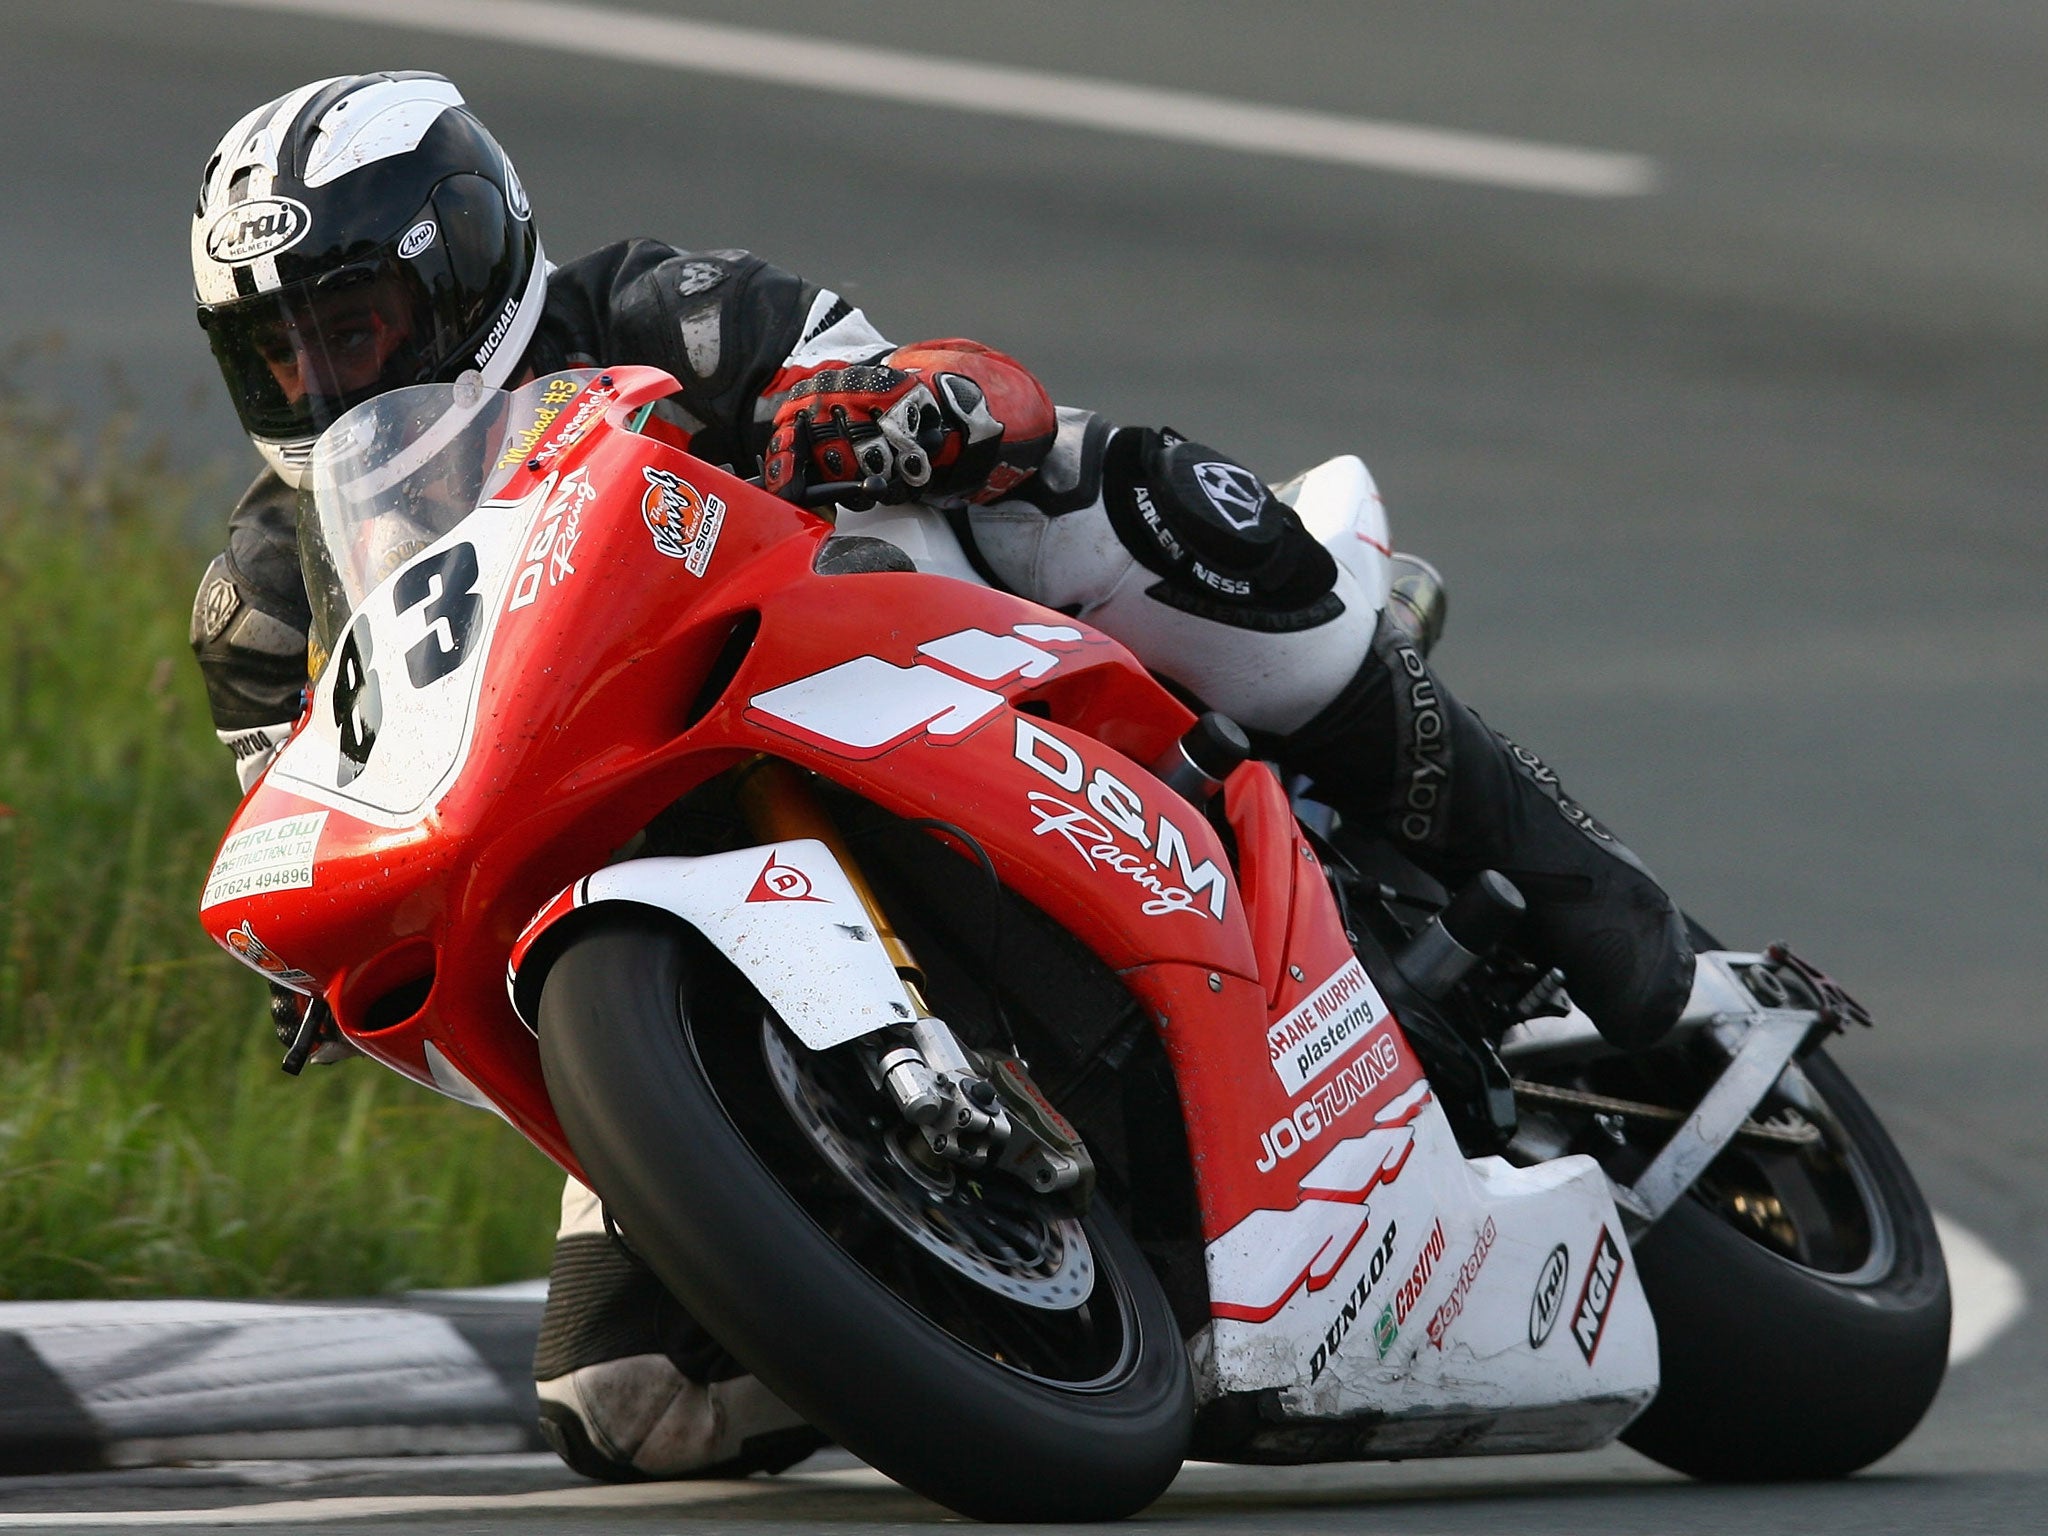 Michael Dunlop in action at the Gooseneck during Practice of the Isle of Man TT